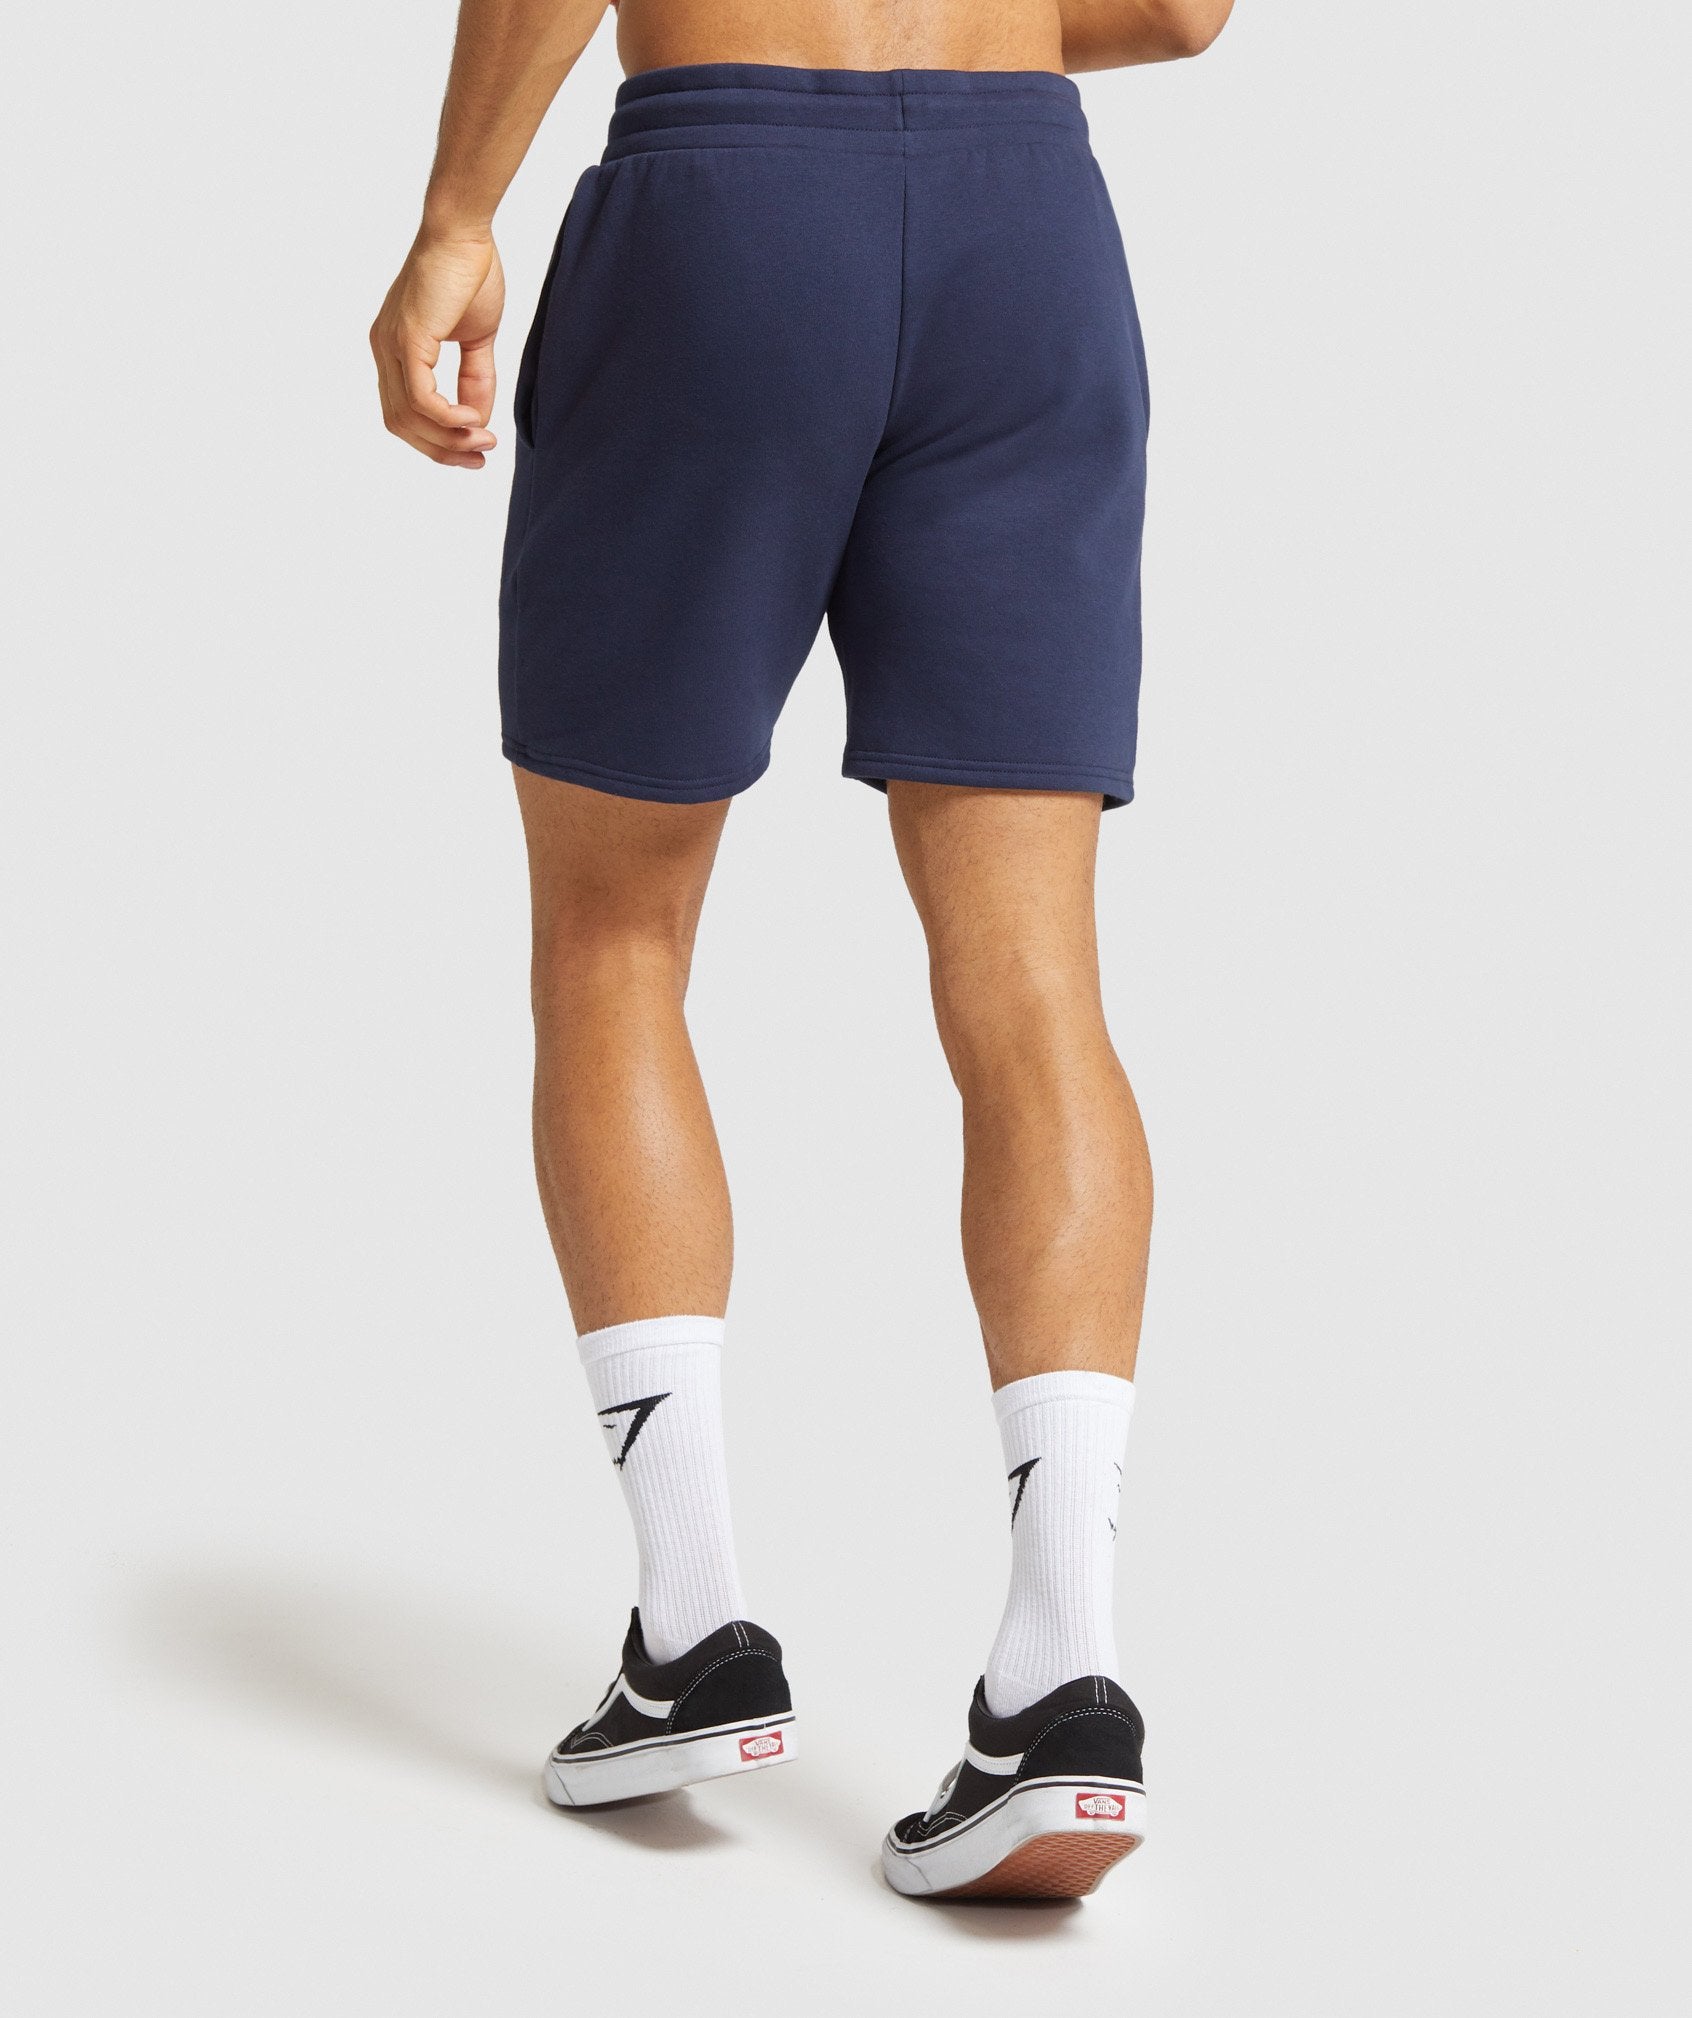 Legacy Shorts in Dark Blue - view 2